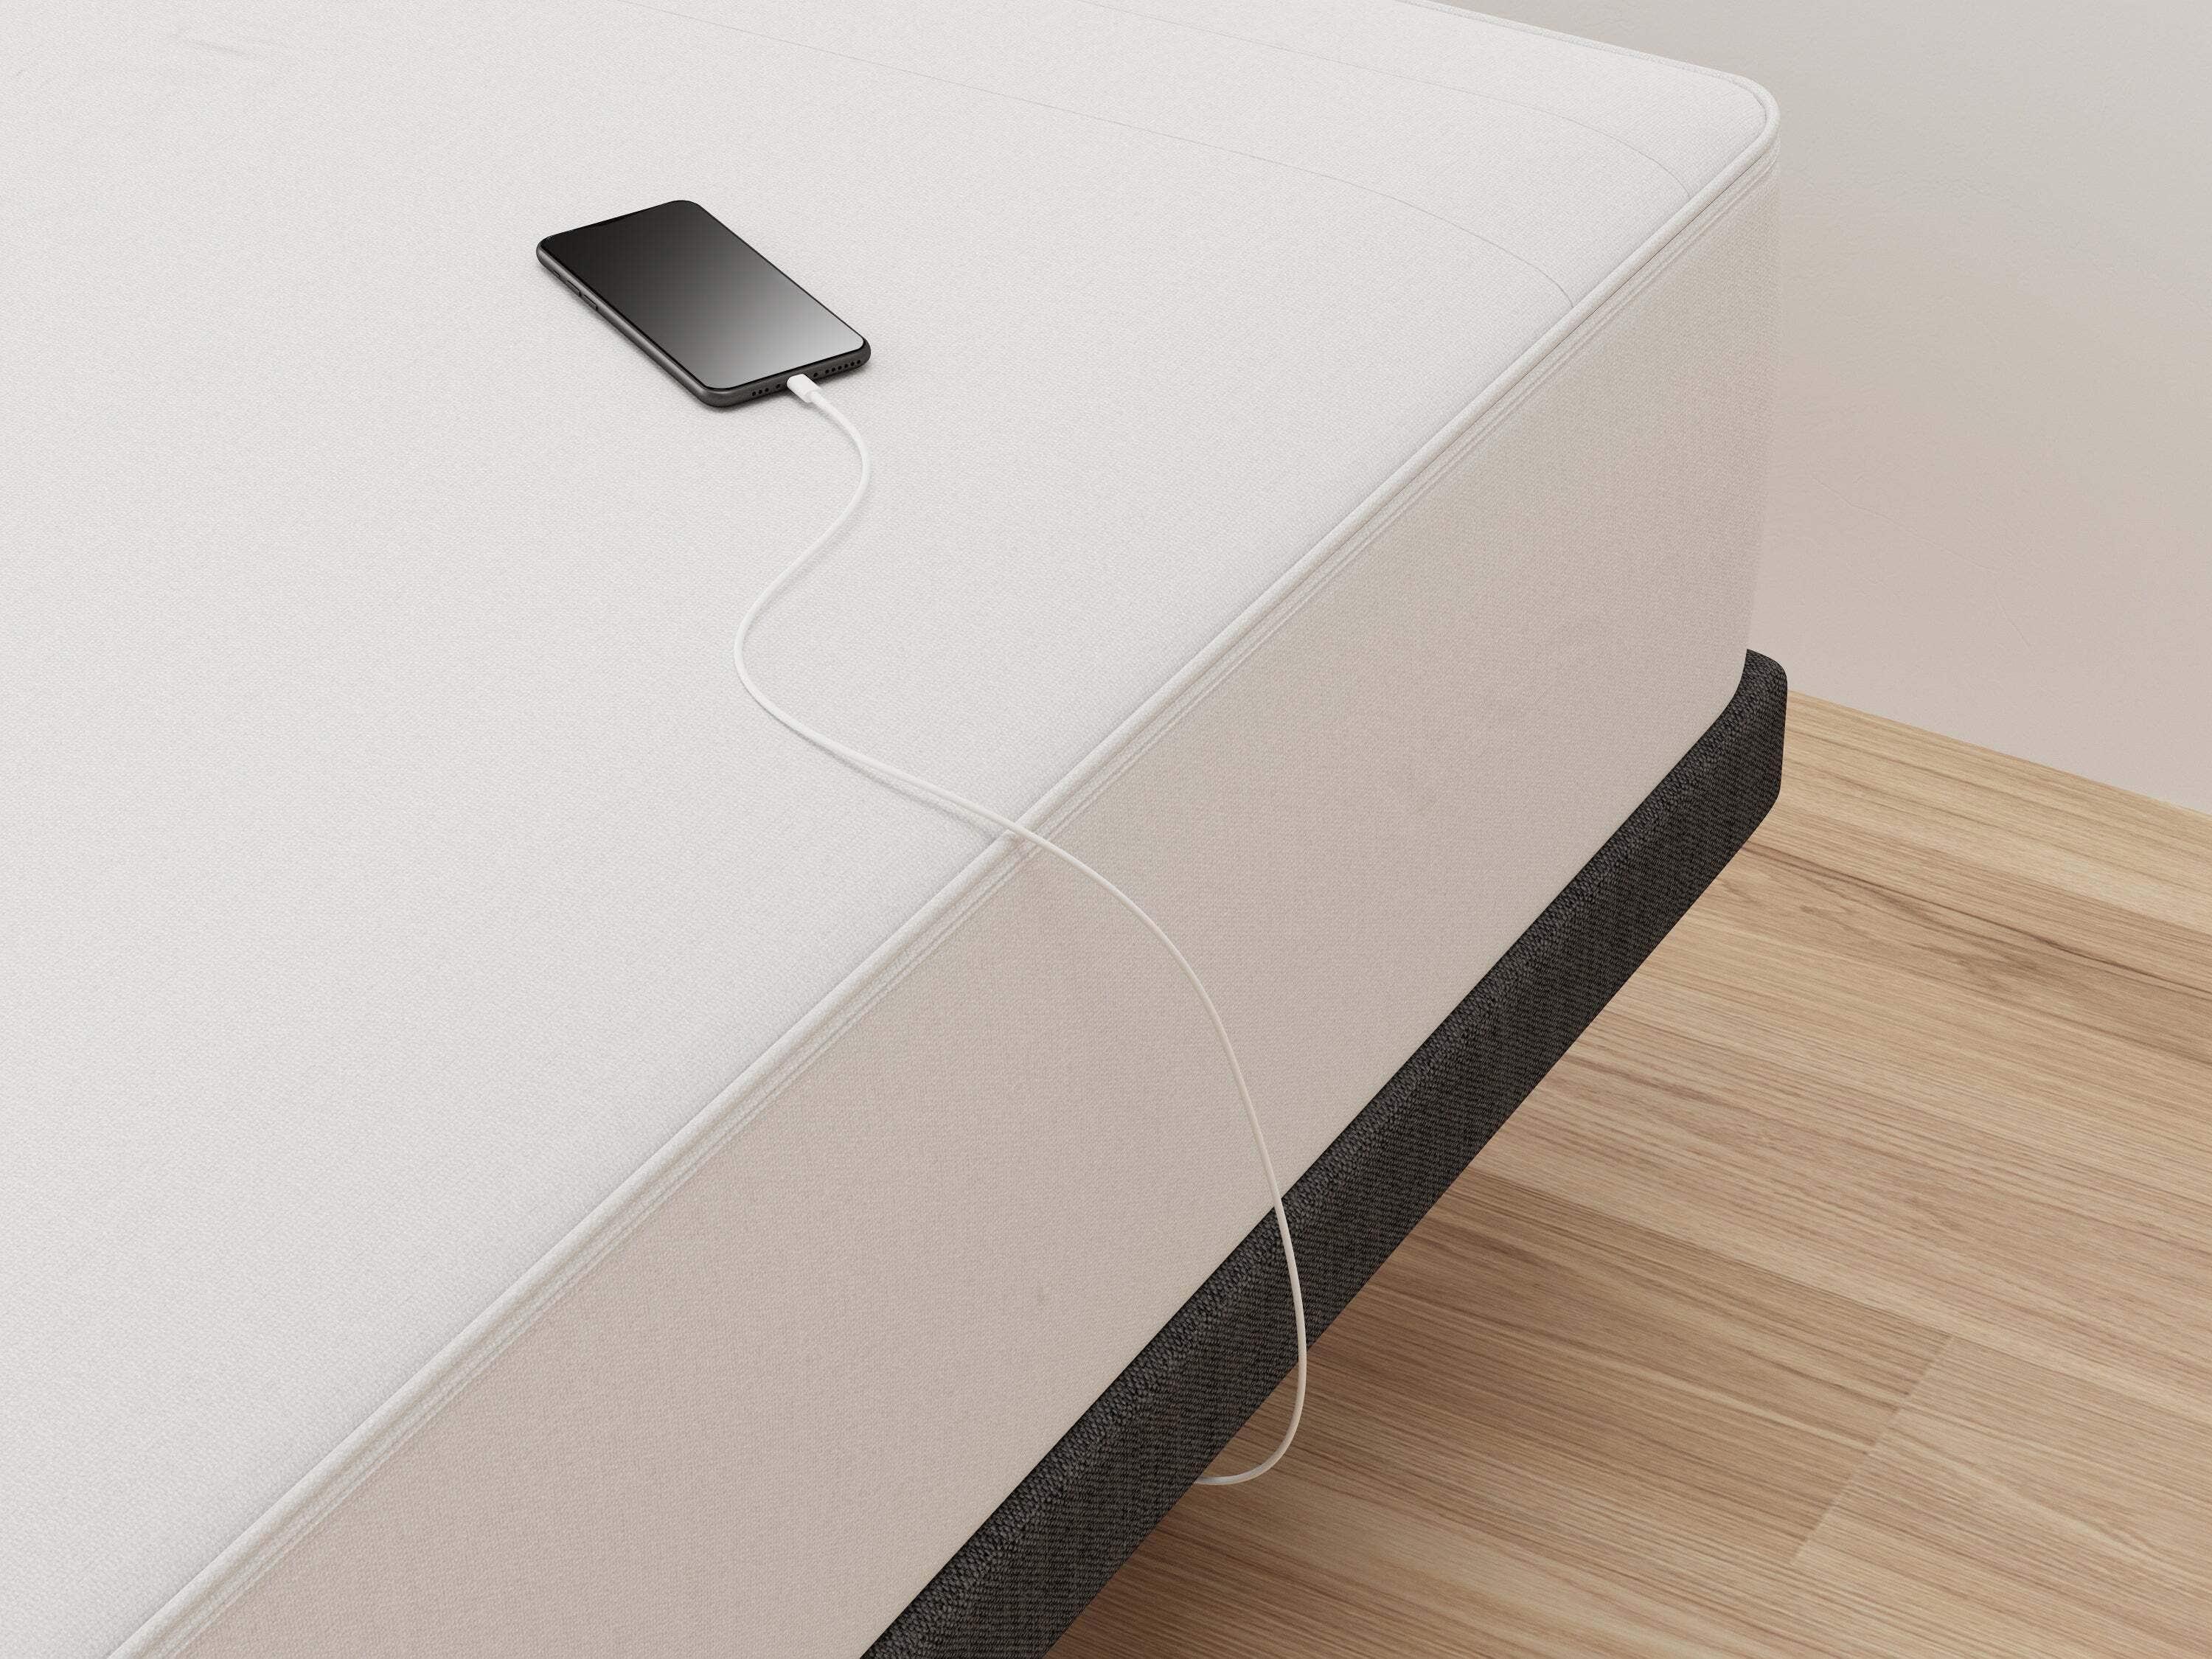 Adjustable Bed Frame with a phone charging